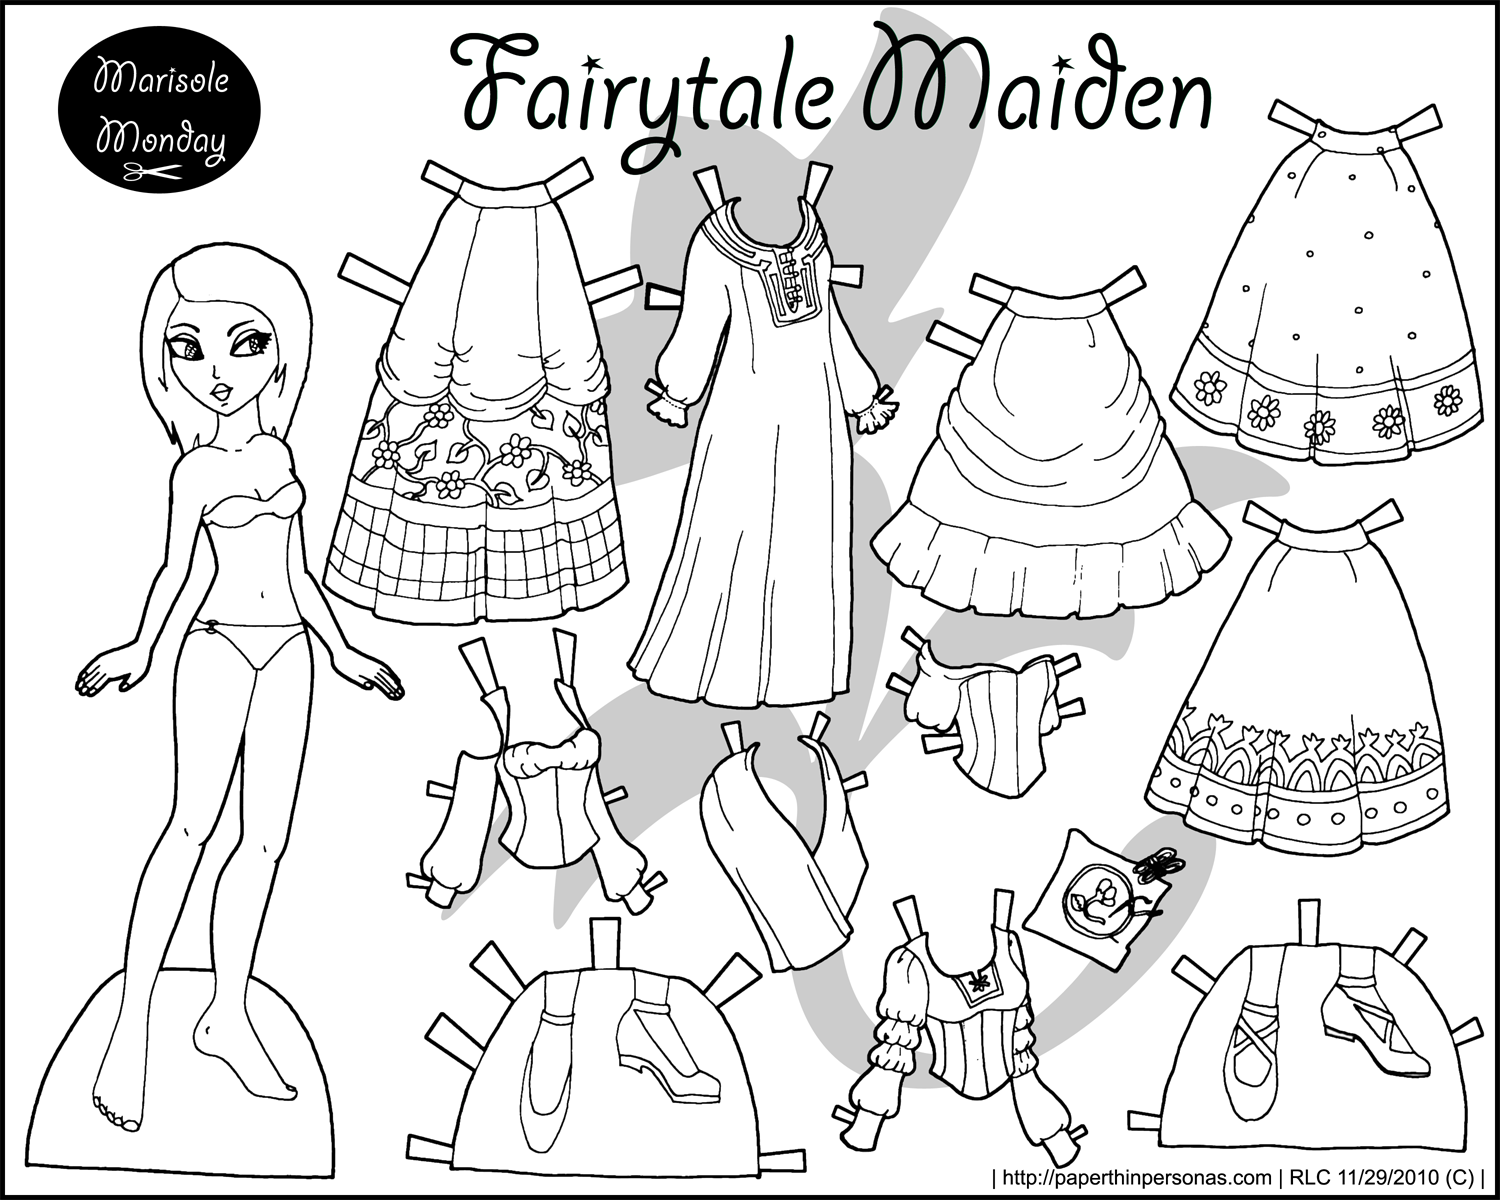 7-best-images-of-printable-cut-out-dolls-coloring-paper-dolls-black